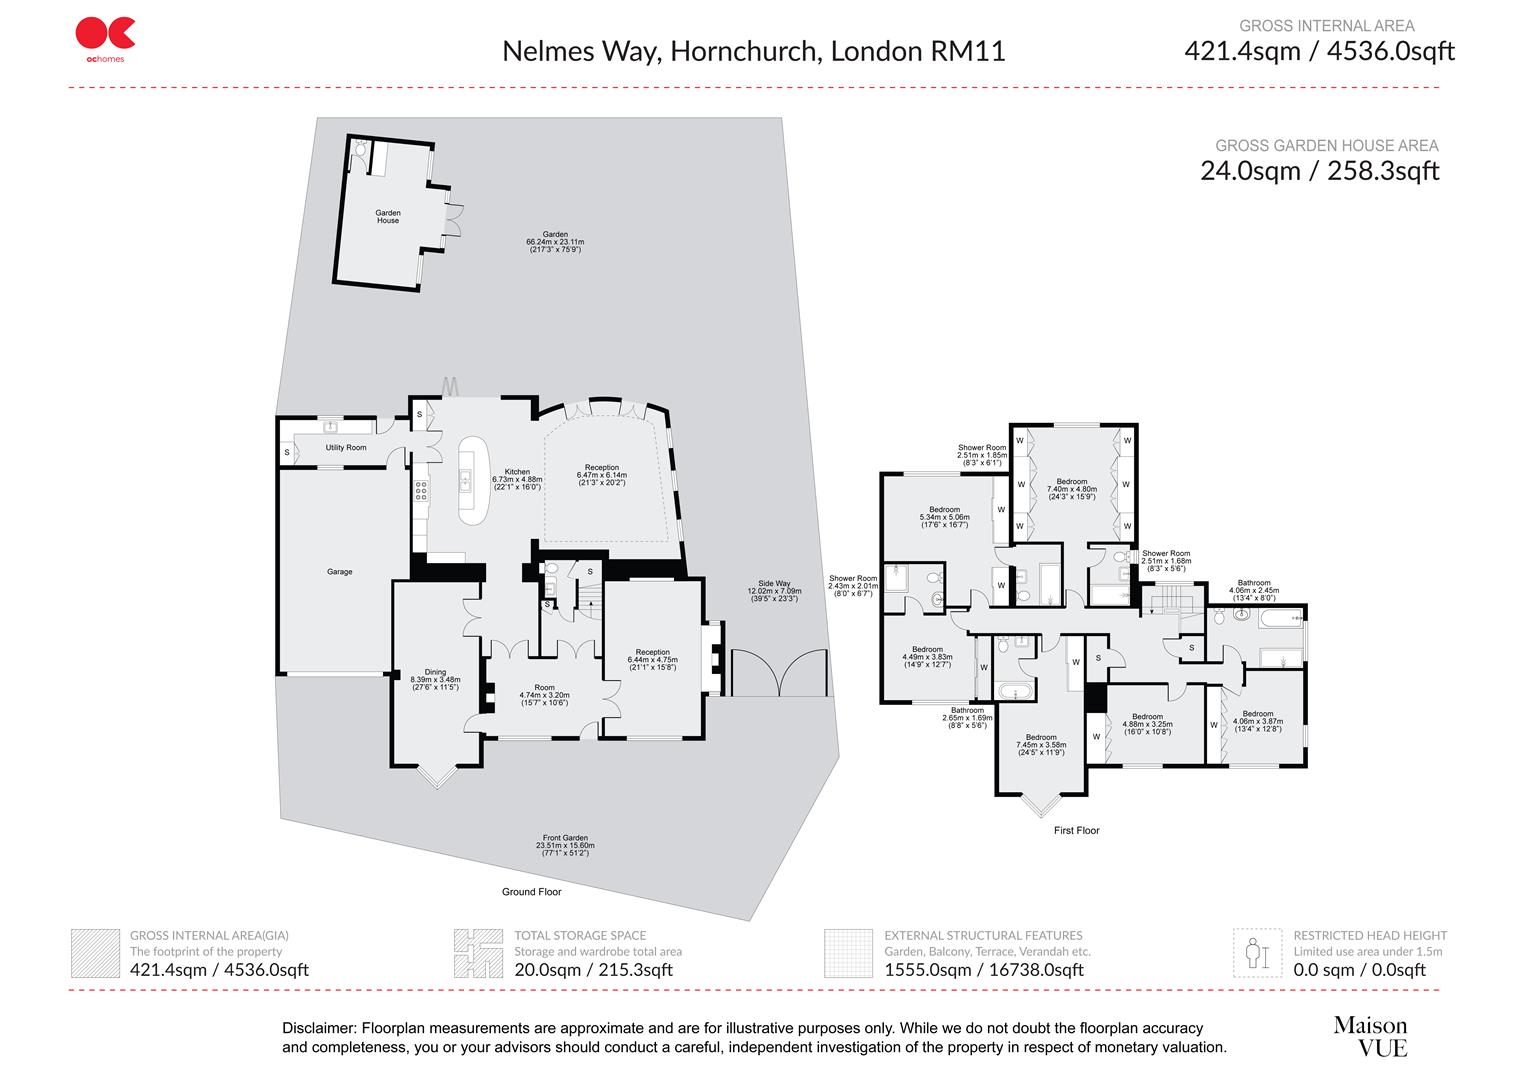 6 bed detached house for sale in Nelmes Way, Hornchurch - Property floorplan